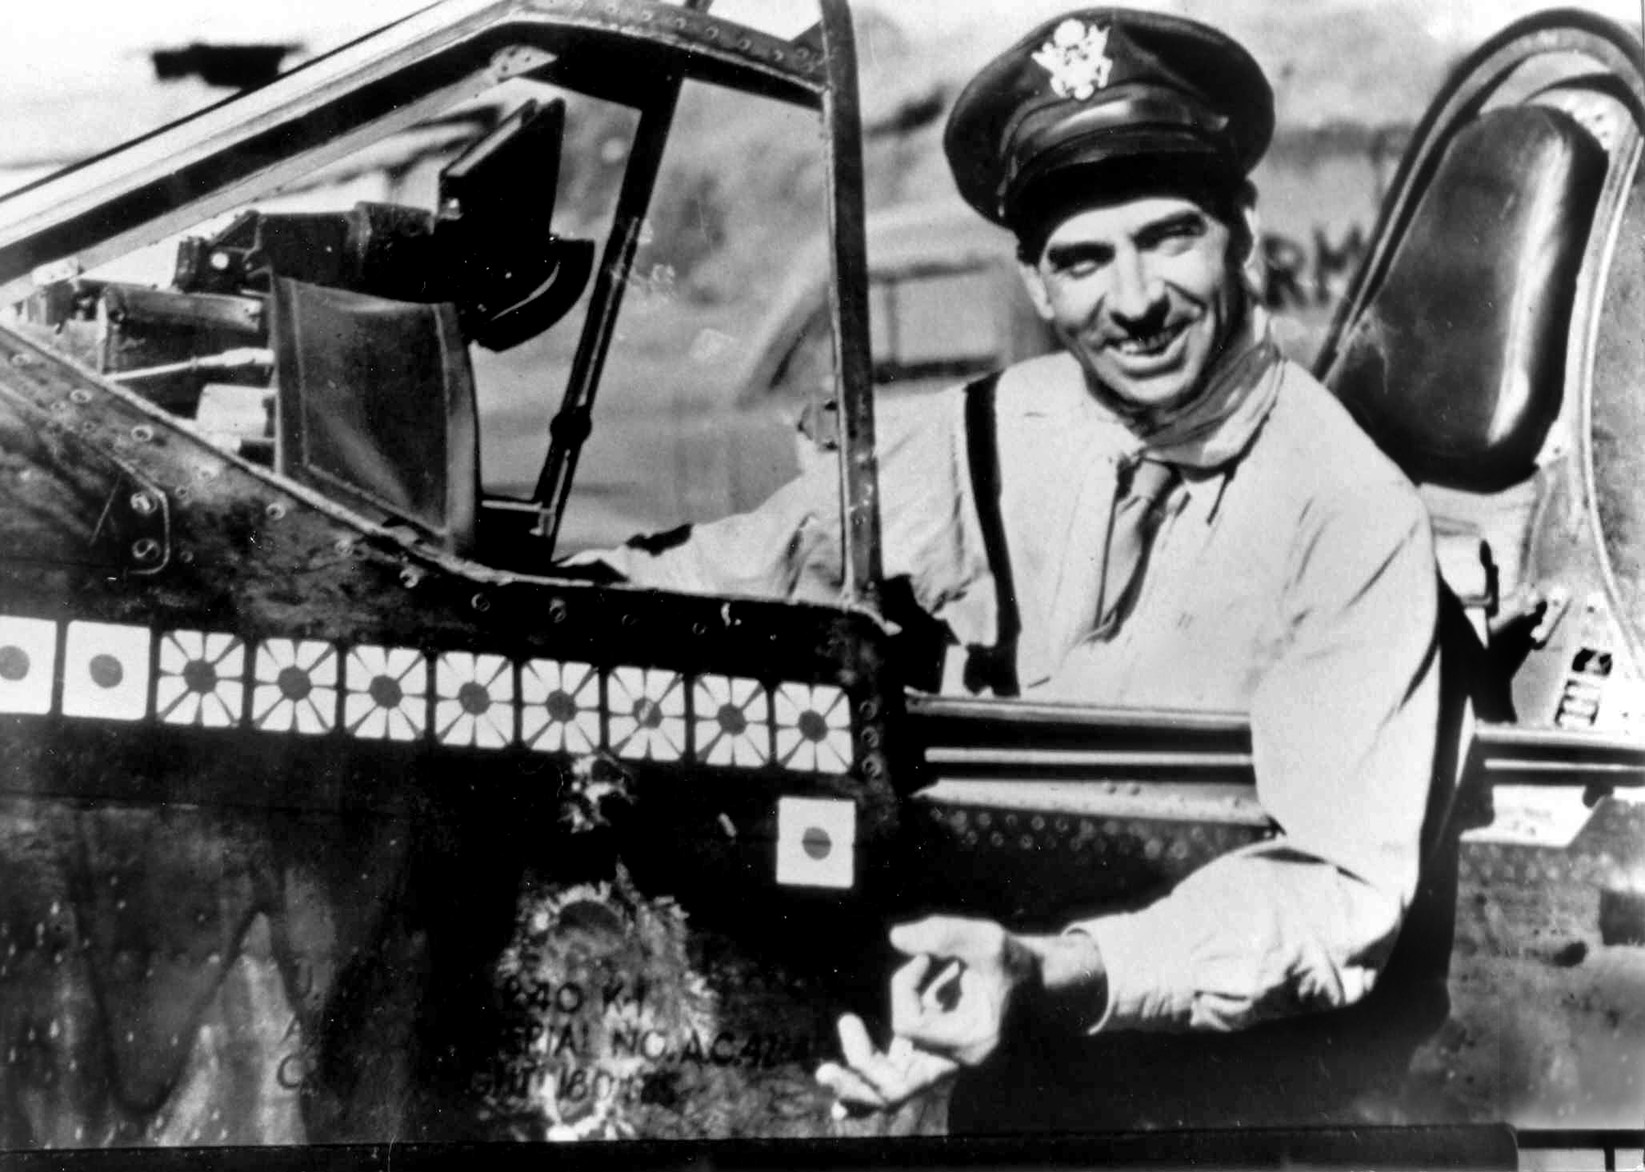 Robert L. Scott, a fighter ace in China, served with Cooper in China after the two officers became friends. Note the Japanese flags painted on the fuselage of Scott’s Curtiss P-40 Warhawk fighter, signifying aerial victories in combat against the enemy.